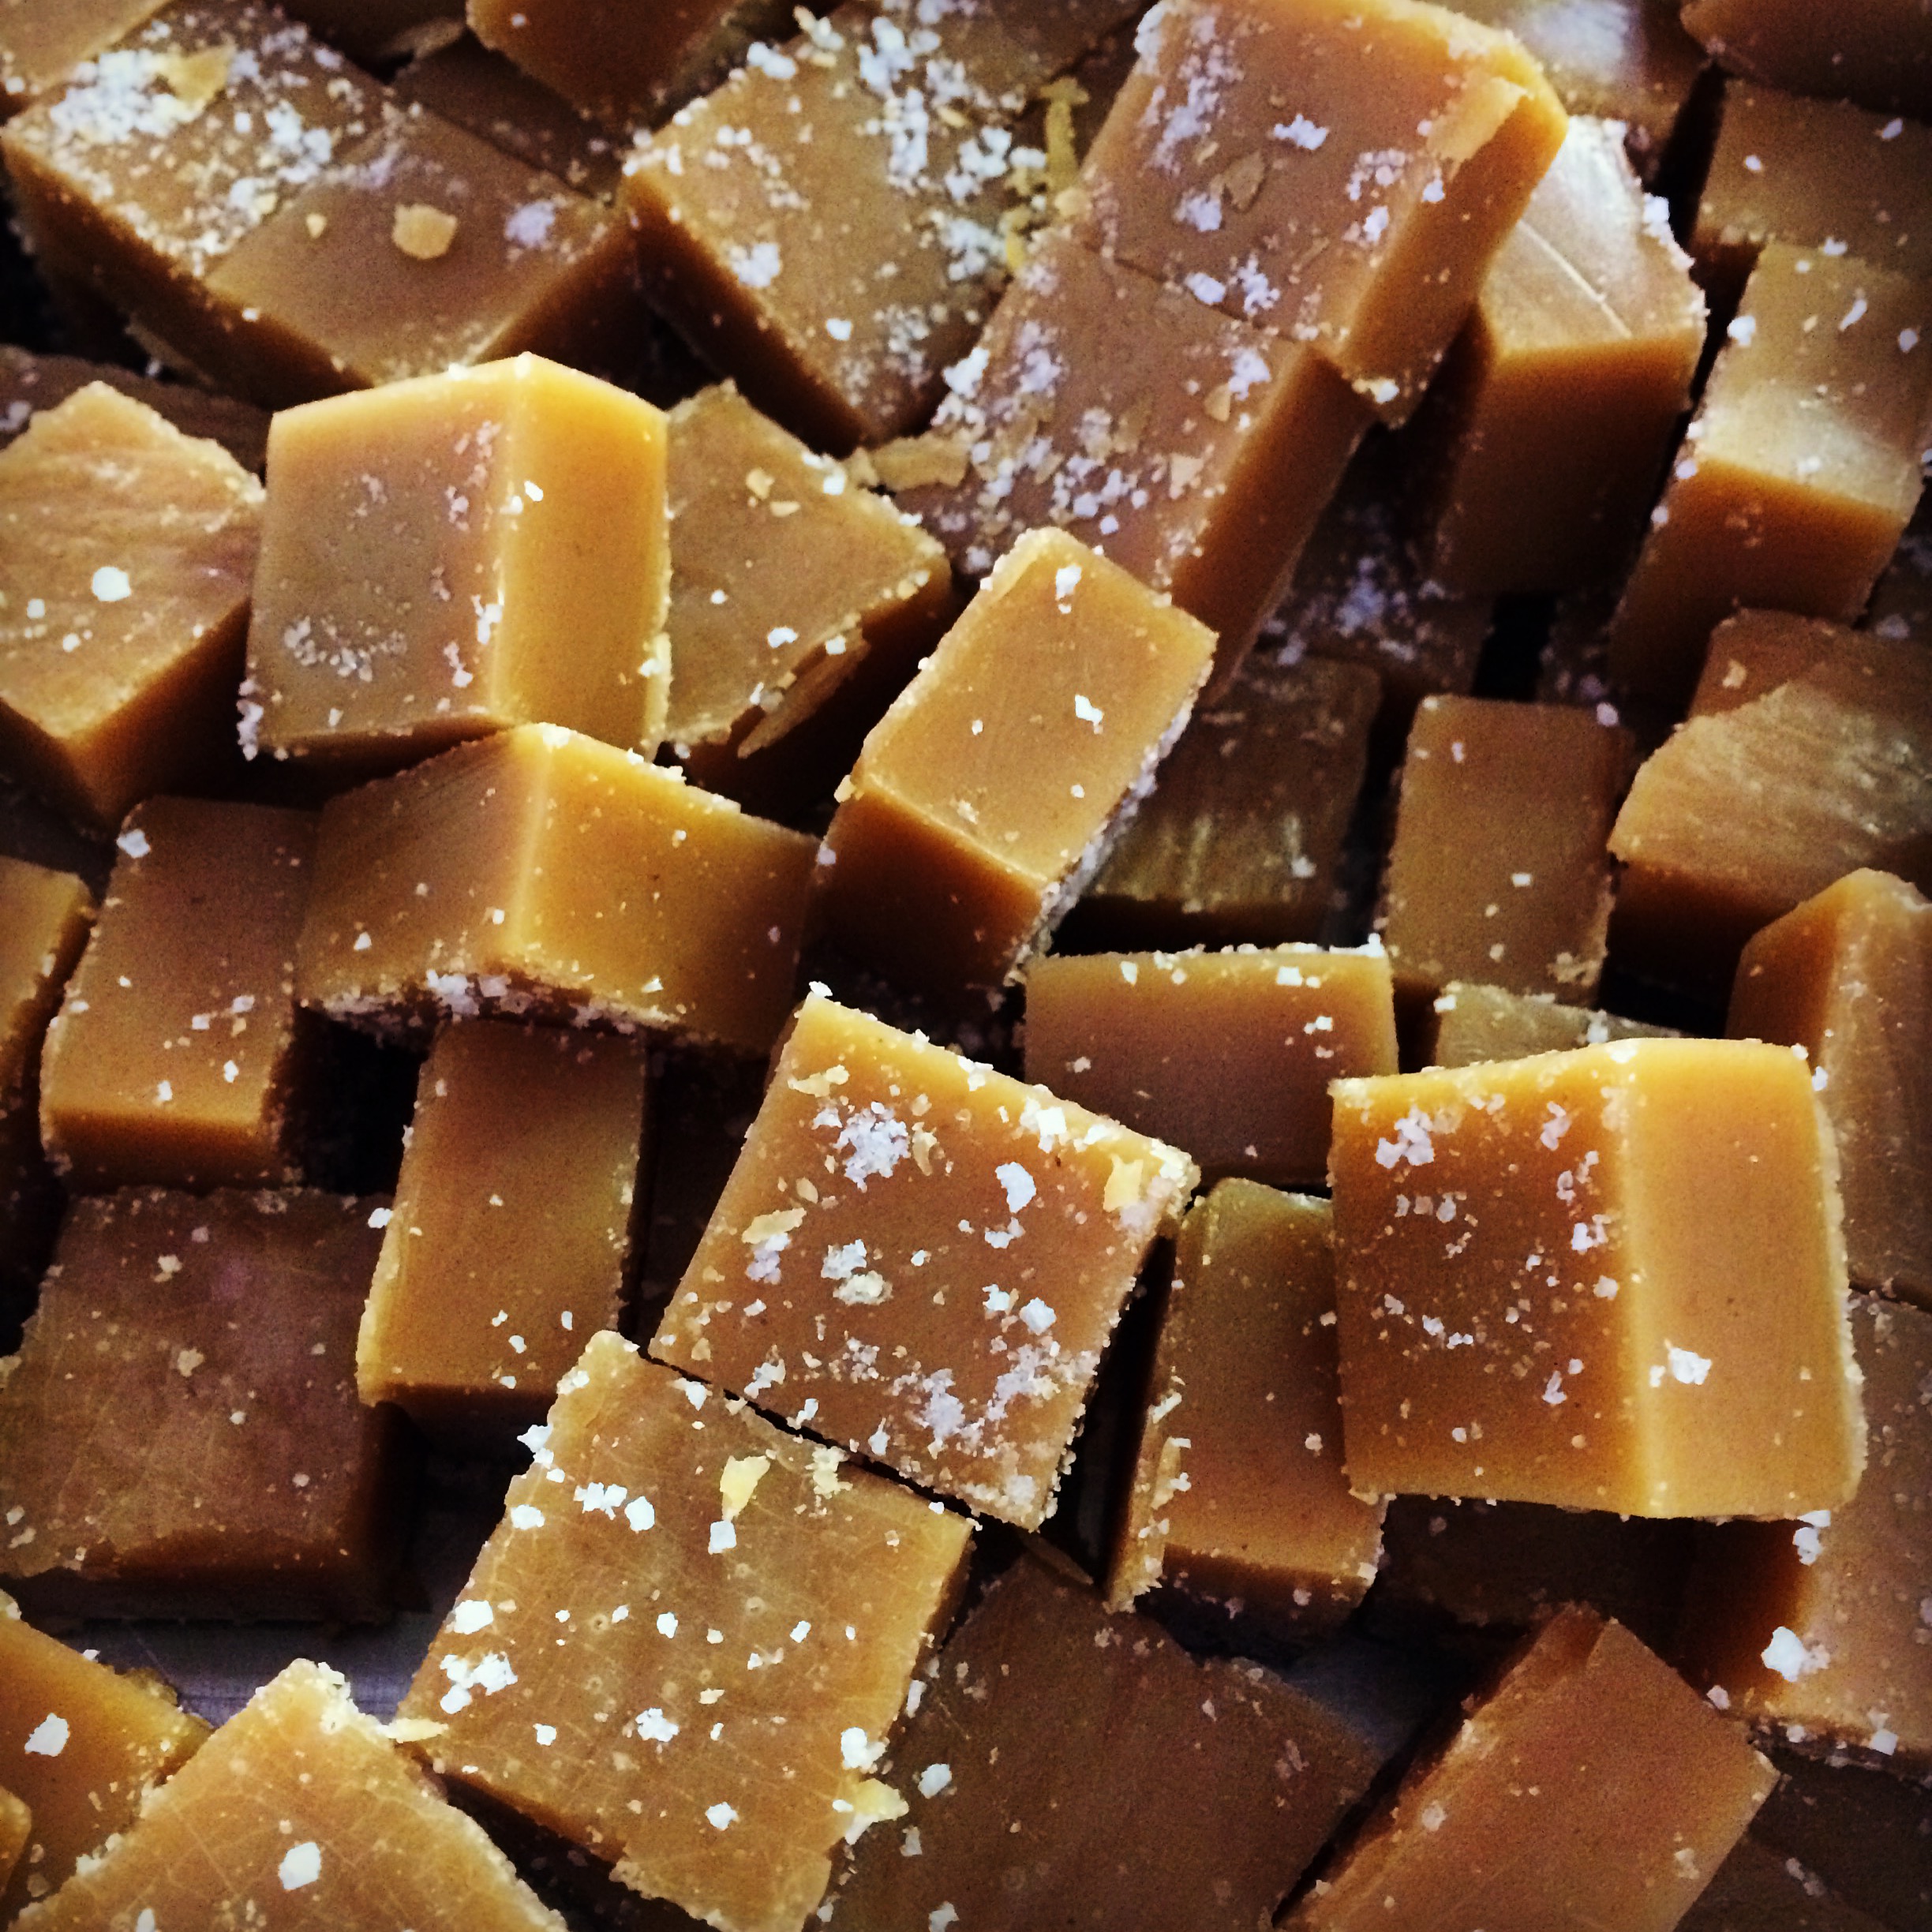 Mouth Party Caramel Giveaway via The Glutton's Digest